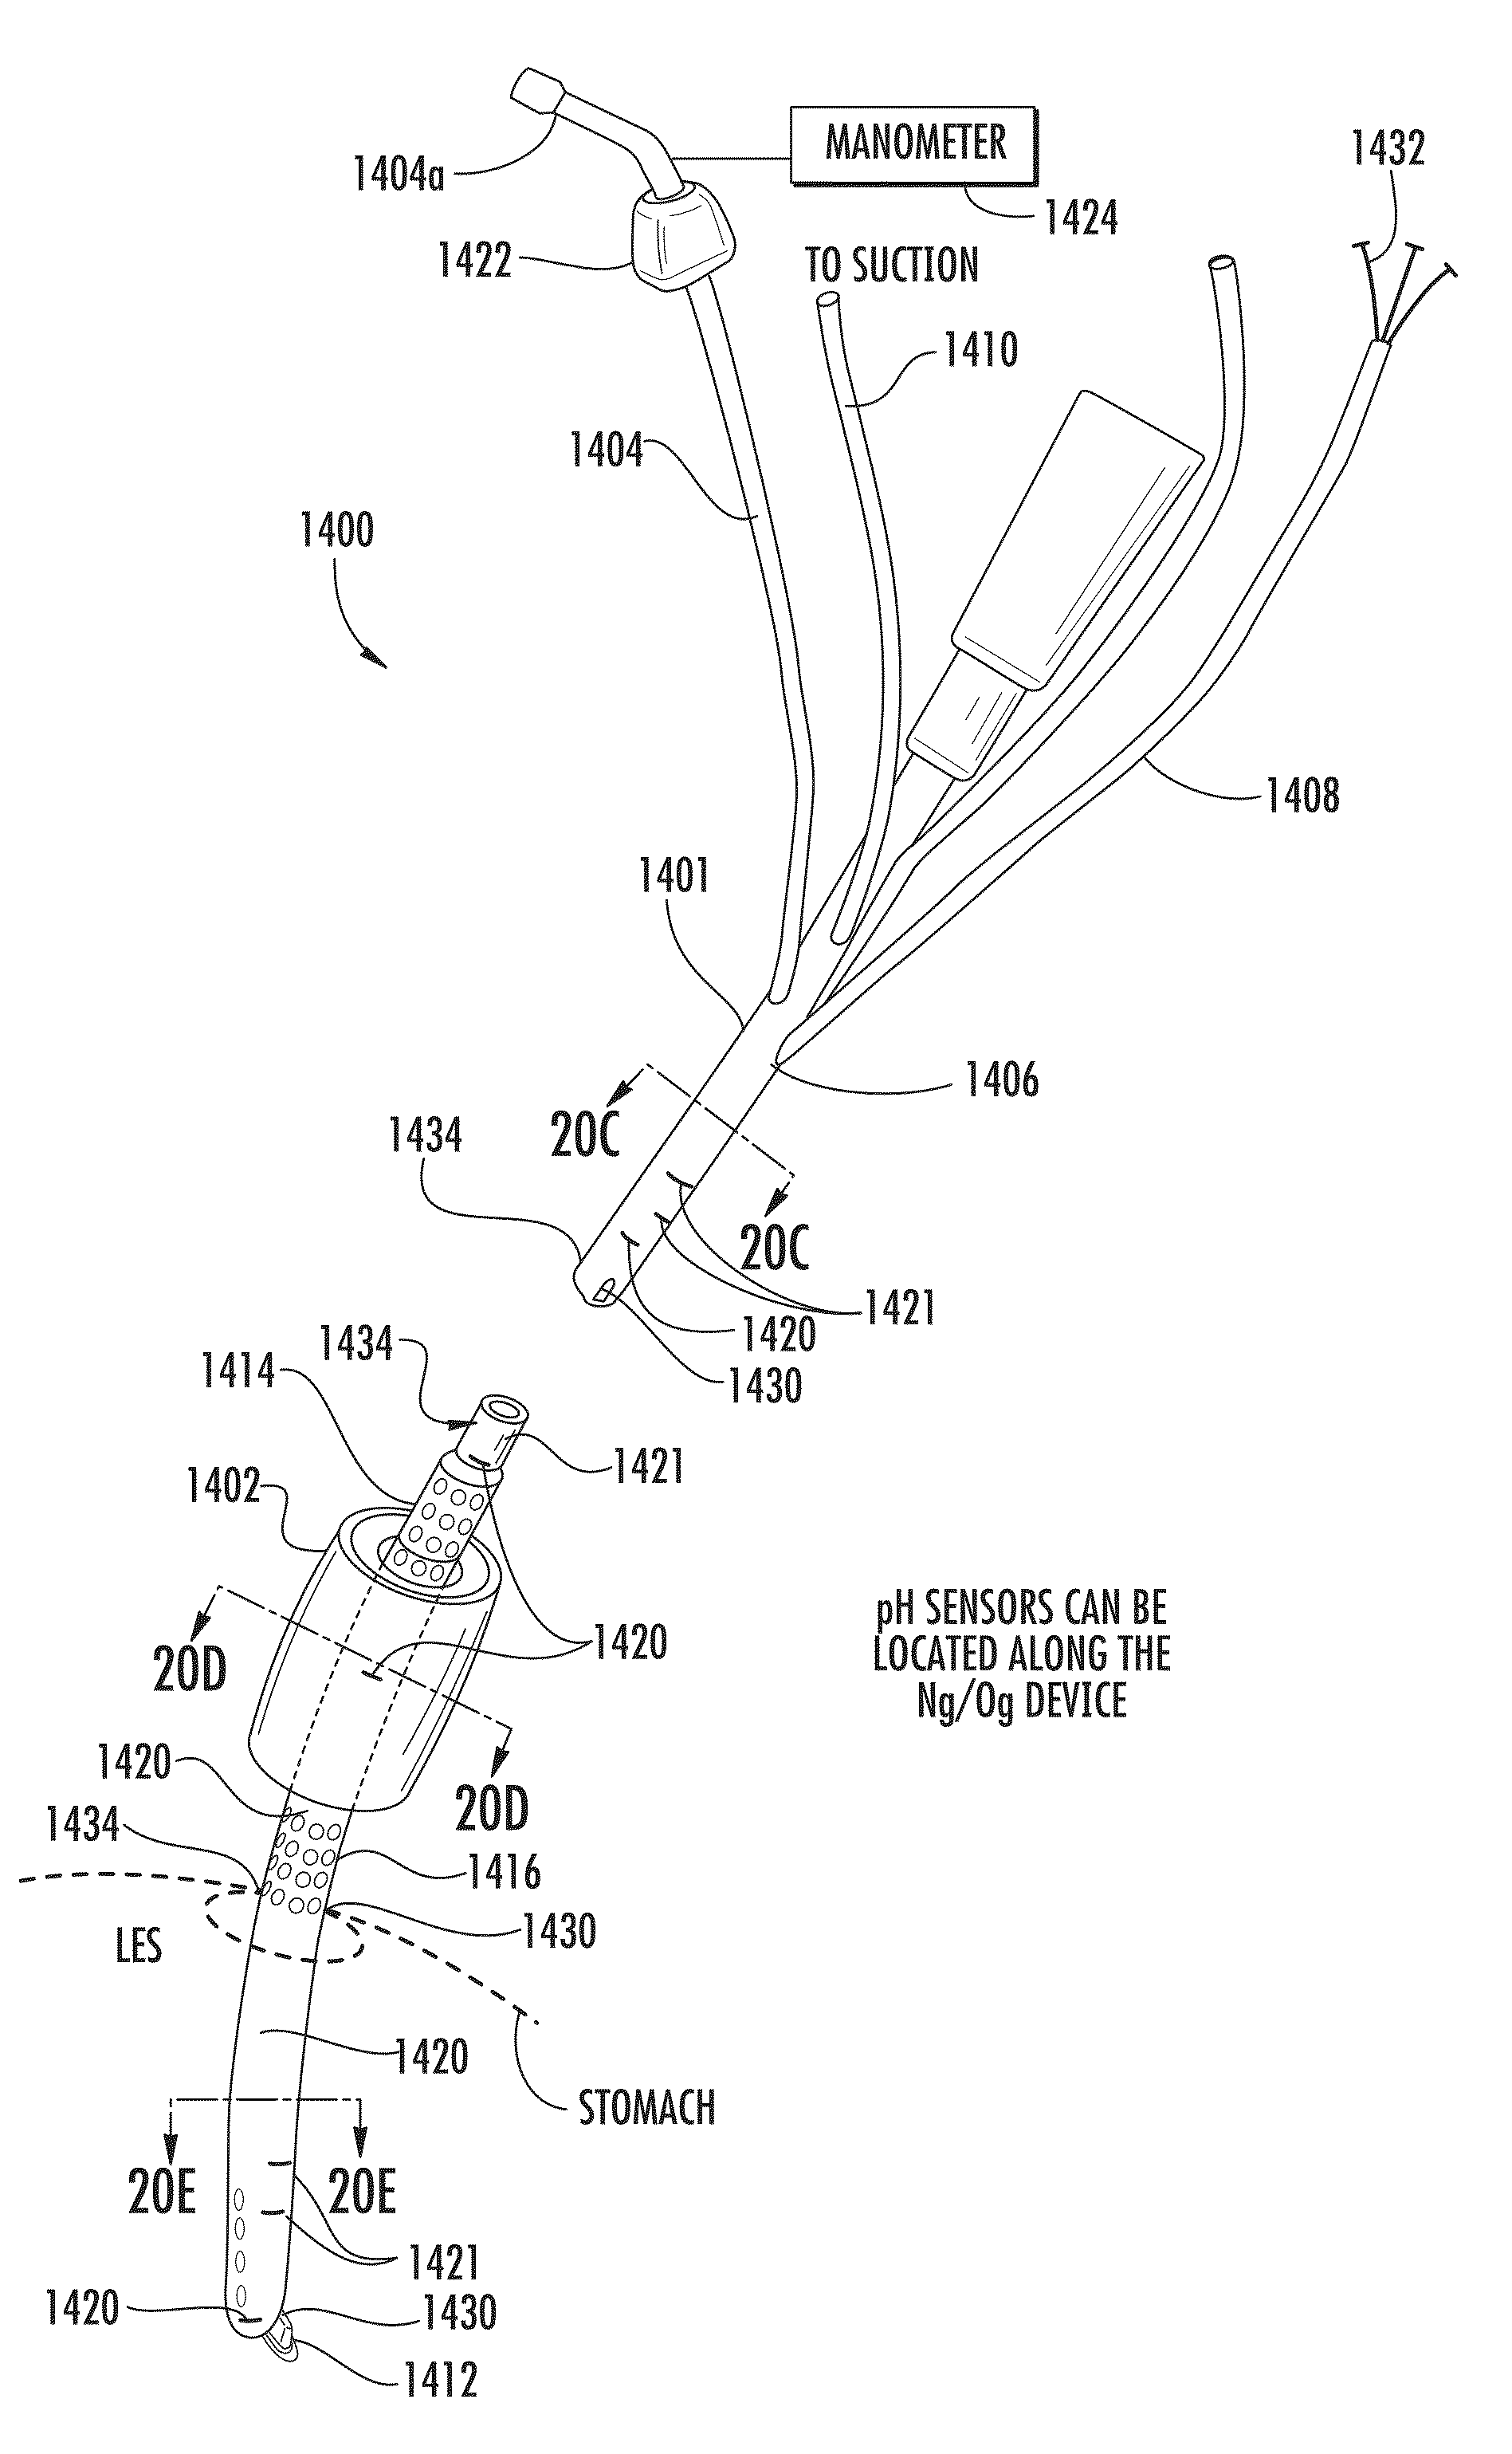 Urinary catheter system for diagnosing a physiological abnormality such as stress urinary incontinence